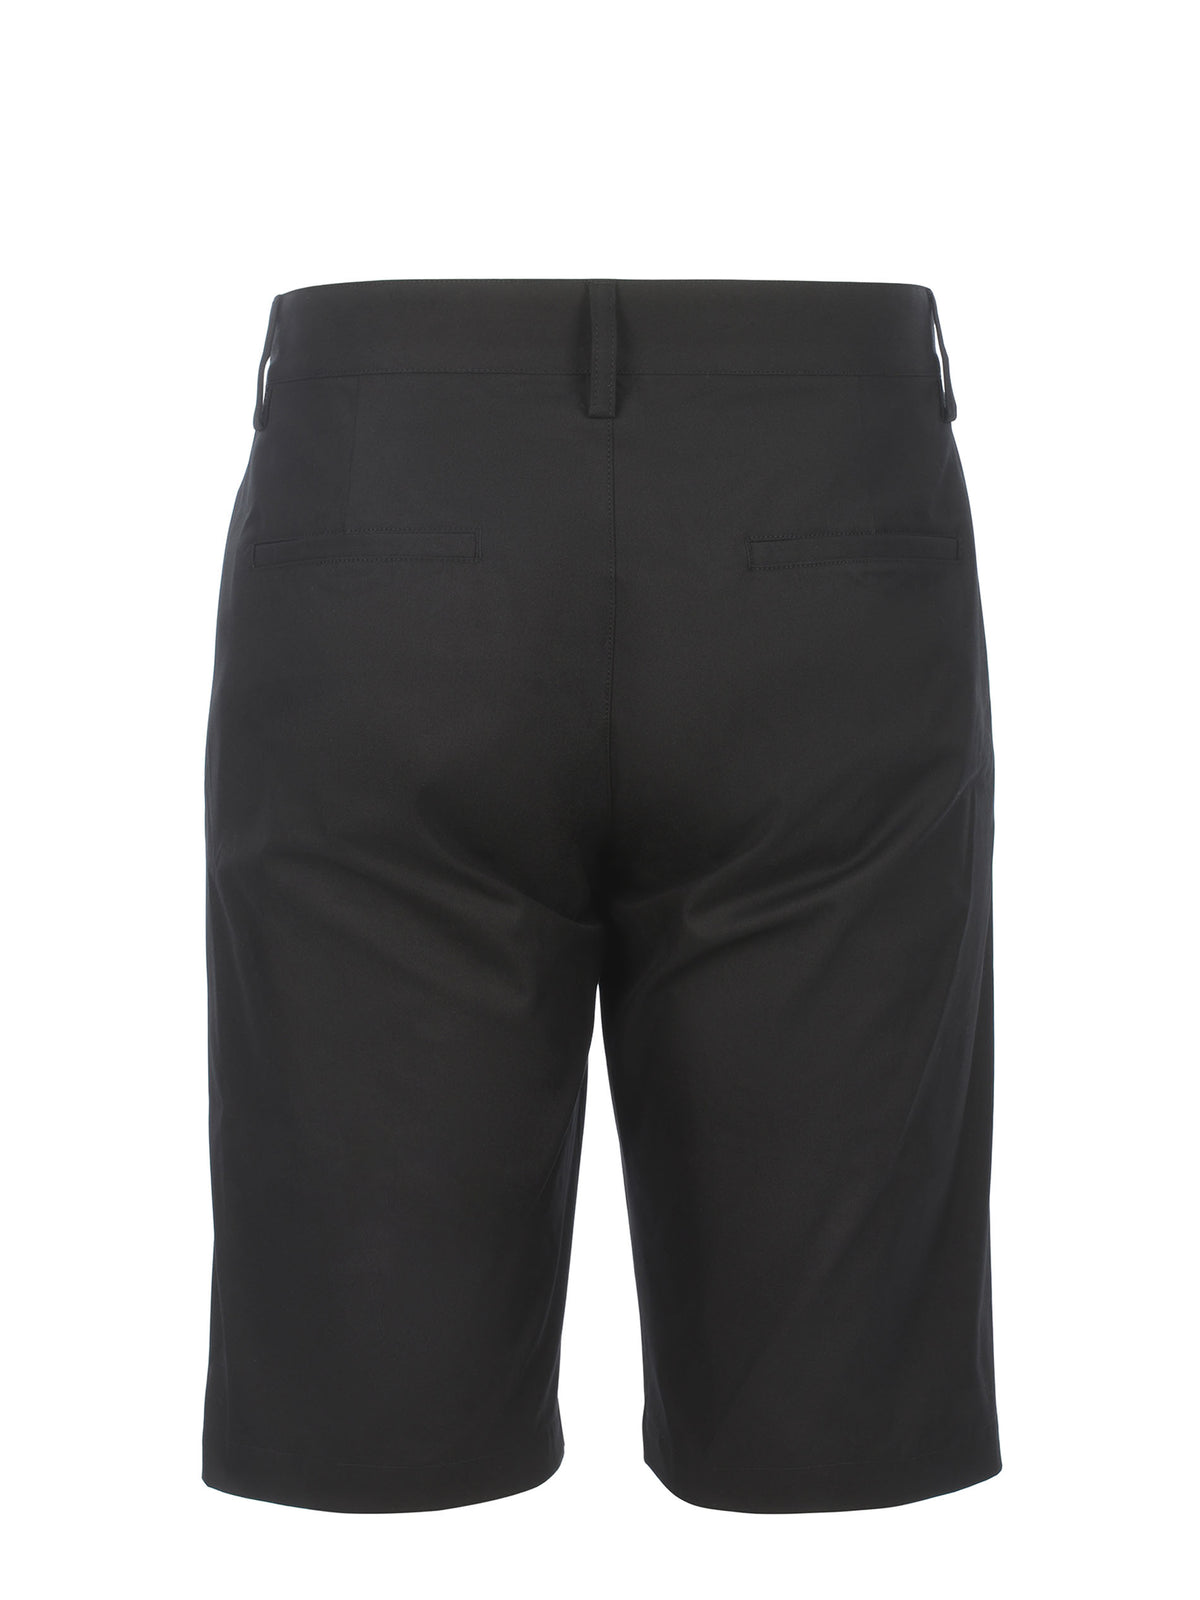 Off-White Black Industrial Chino Shorts